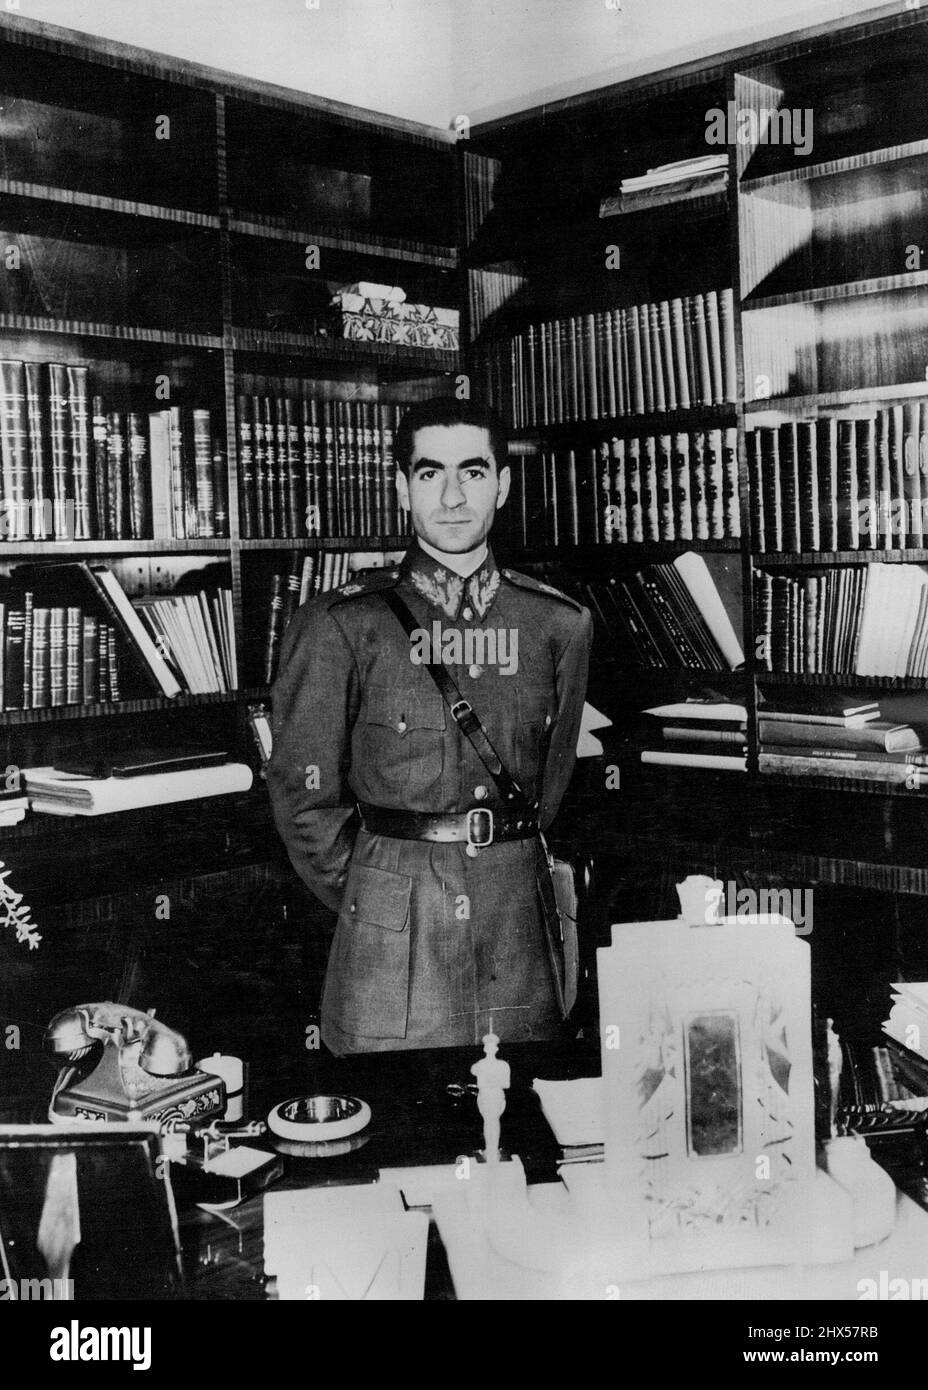 Ruler Of Iran -- Mohammad Reza Shah Pahlavi, King of Iran, photographed in his study in the Royal Palace at Teheran. On his desk (left) is a gold telephone and (right) an elaborate desk - set surmounted by a miniature crown.A 27-year-old King rules over 15,000,000 people whose security and independence have become the subject of World Debate. He is Mohammad Reza Shah Pahlavi, ruler of Iran, who ***** the late Riza Shah, in 1941. The young King was educated in Switzerland and speaks several languages, including English. In 1938 he was married to Fowzieh, sister of King Farouk of Egypt. They hav Stock Photo